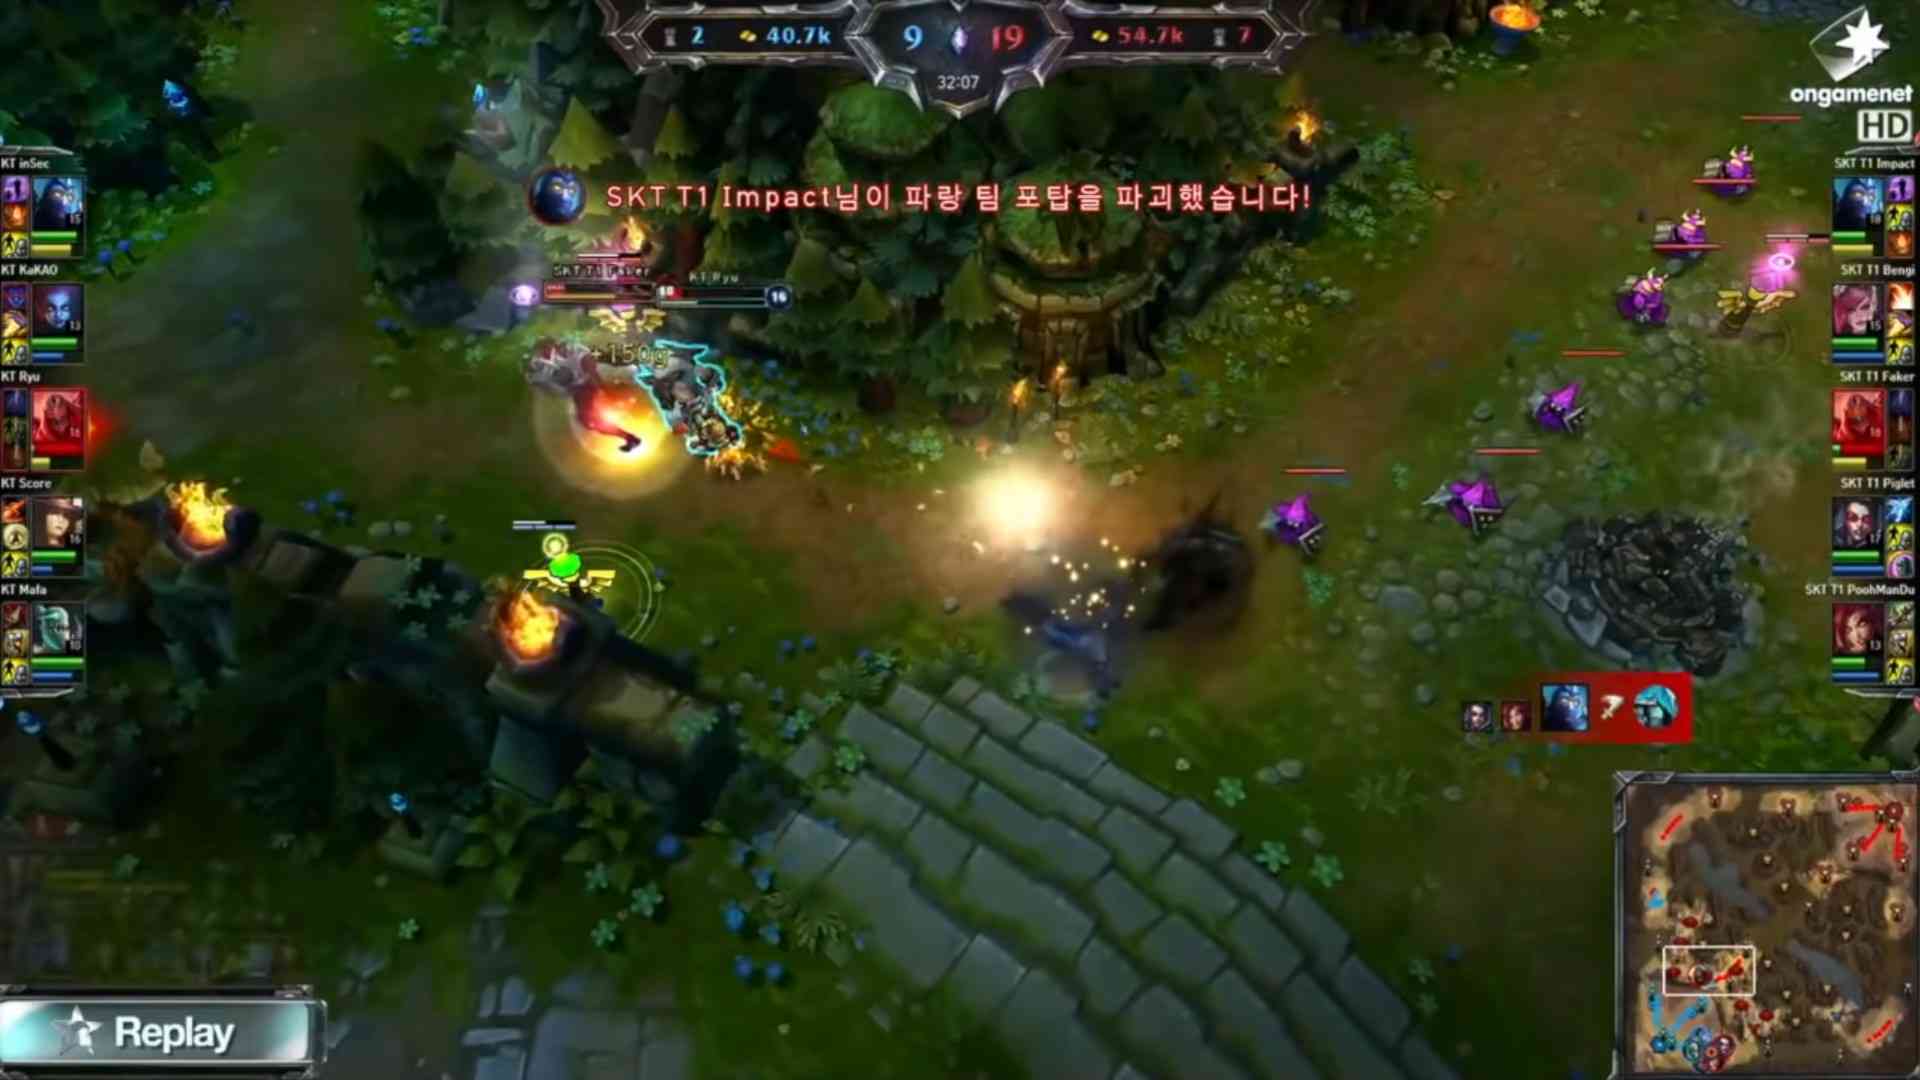 Faker Stream Moments, Faker on Akali absolutely destroyed that Aatrox  🔥🔥, By T1 Faker